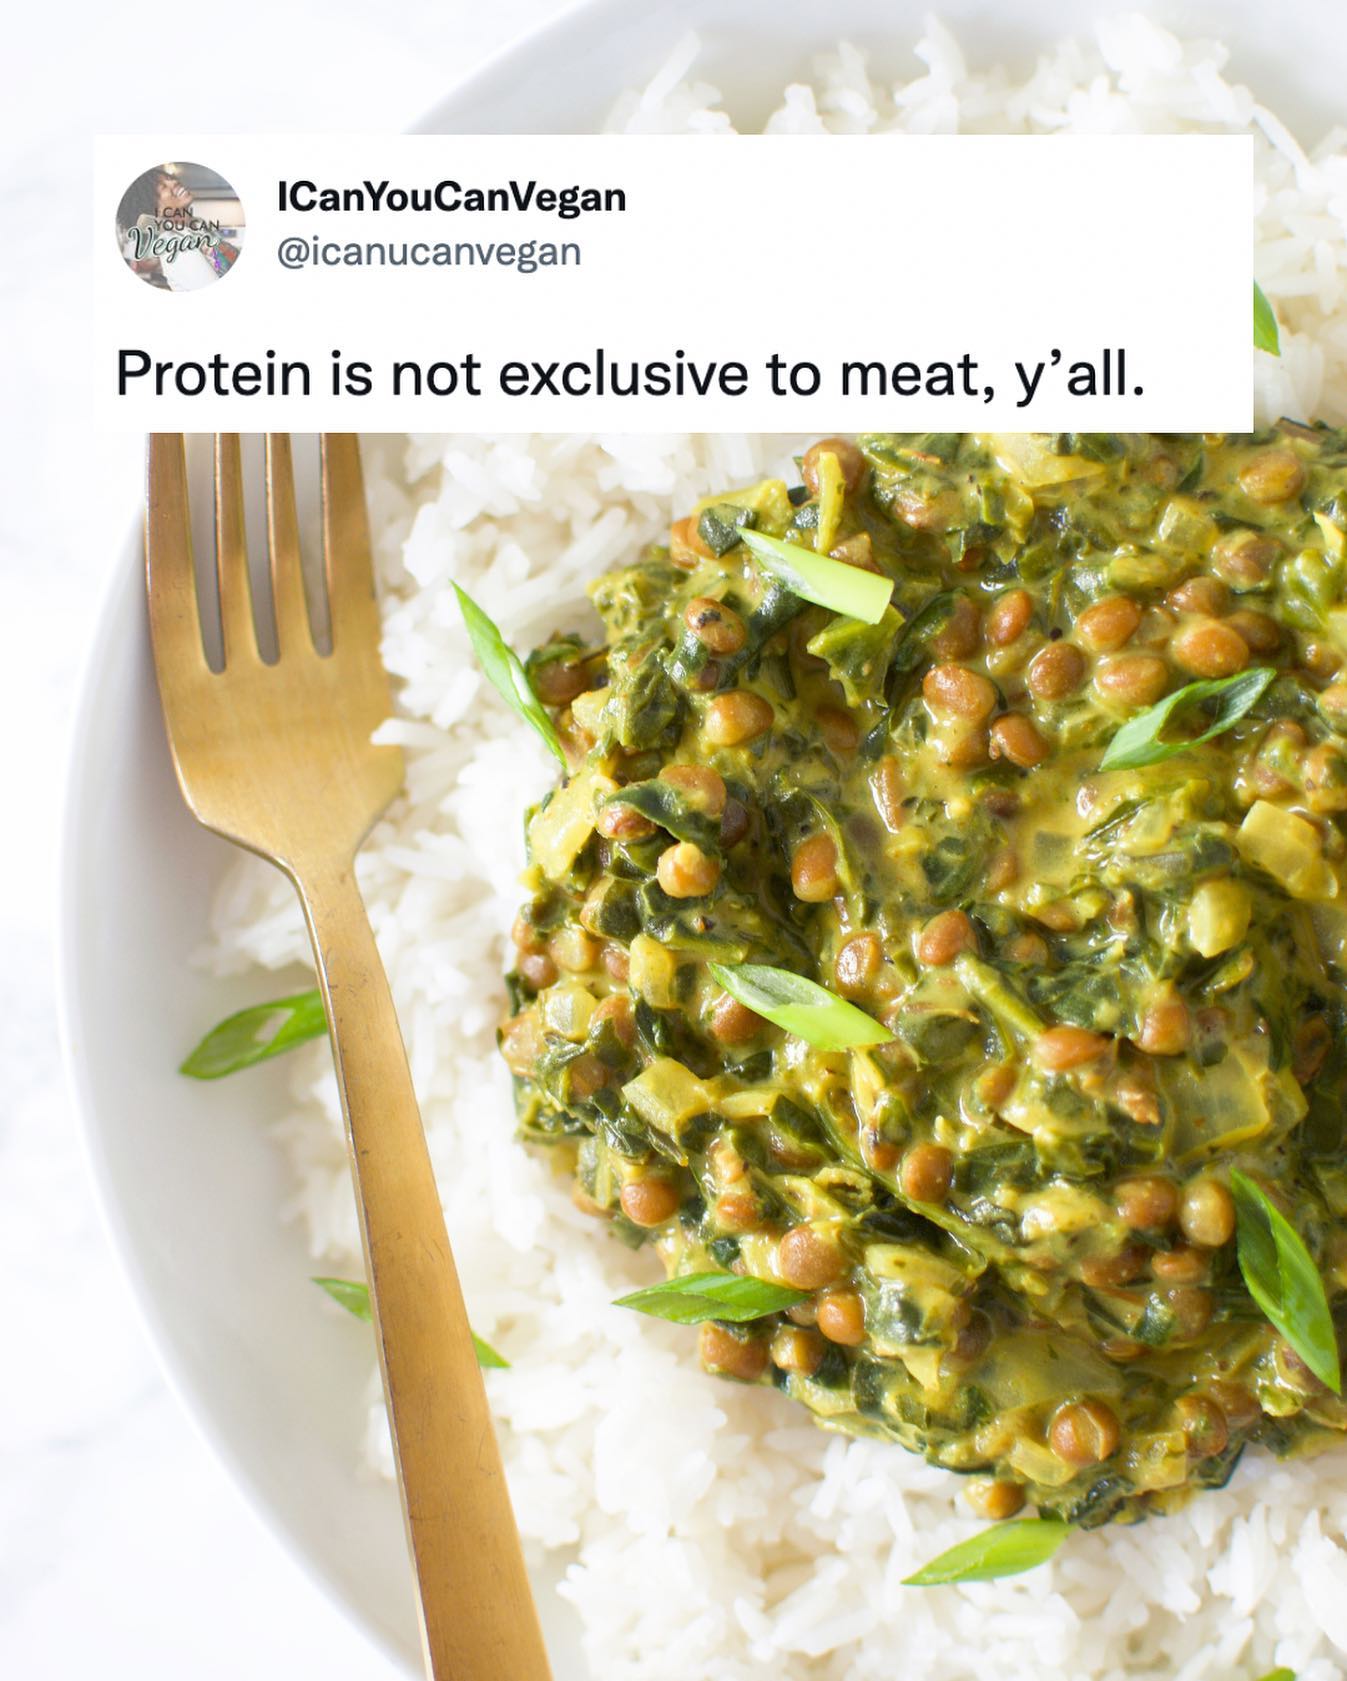 Welcome to Veganuary y’all! If your new to the vegan life, one of the questions you’ll undoubtedly get is “where do you get your protein from?”

Contrary to popular belief, protein can be found in lots of foods outside of meat. Like lentils for example. 1 cooked cup of lentils has 18 grams of protein in it!🙌🏾 Spinach contains protein too, which makes this Lentil Spinach Curry FULL of protein!

What are your fav plant-based proteins? My favs will always be tofu, beans and oats 😋

Get the recipe for this Spinach Lentil curry on the blog! Link in bio!

www.icanyoucanvegan.com/lentil-spinach-curry/